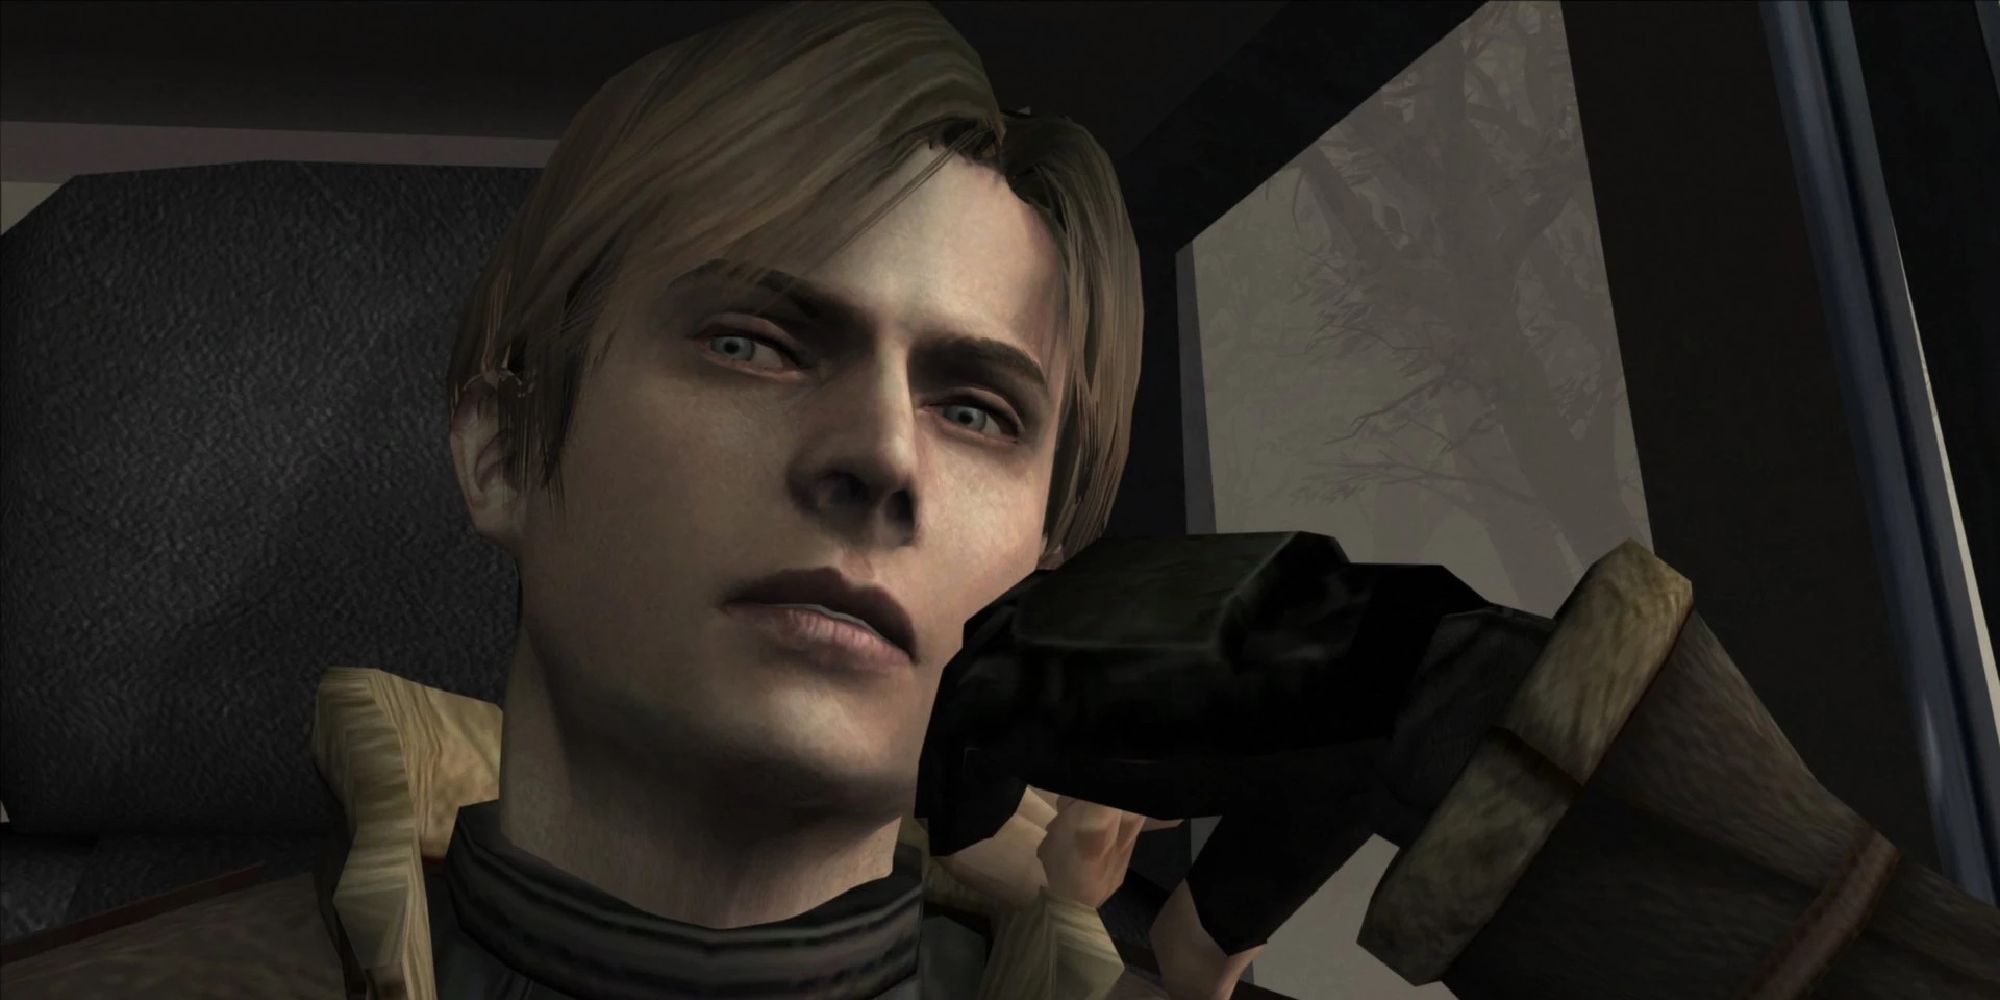 Leon in the back of the keep in the very opening scene for the original Resident Evil 4, glaring at his drivers. 